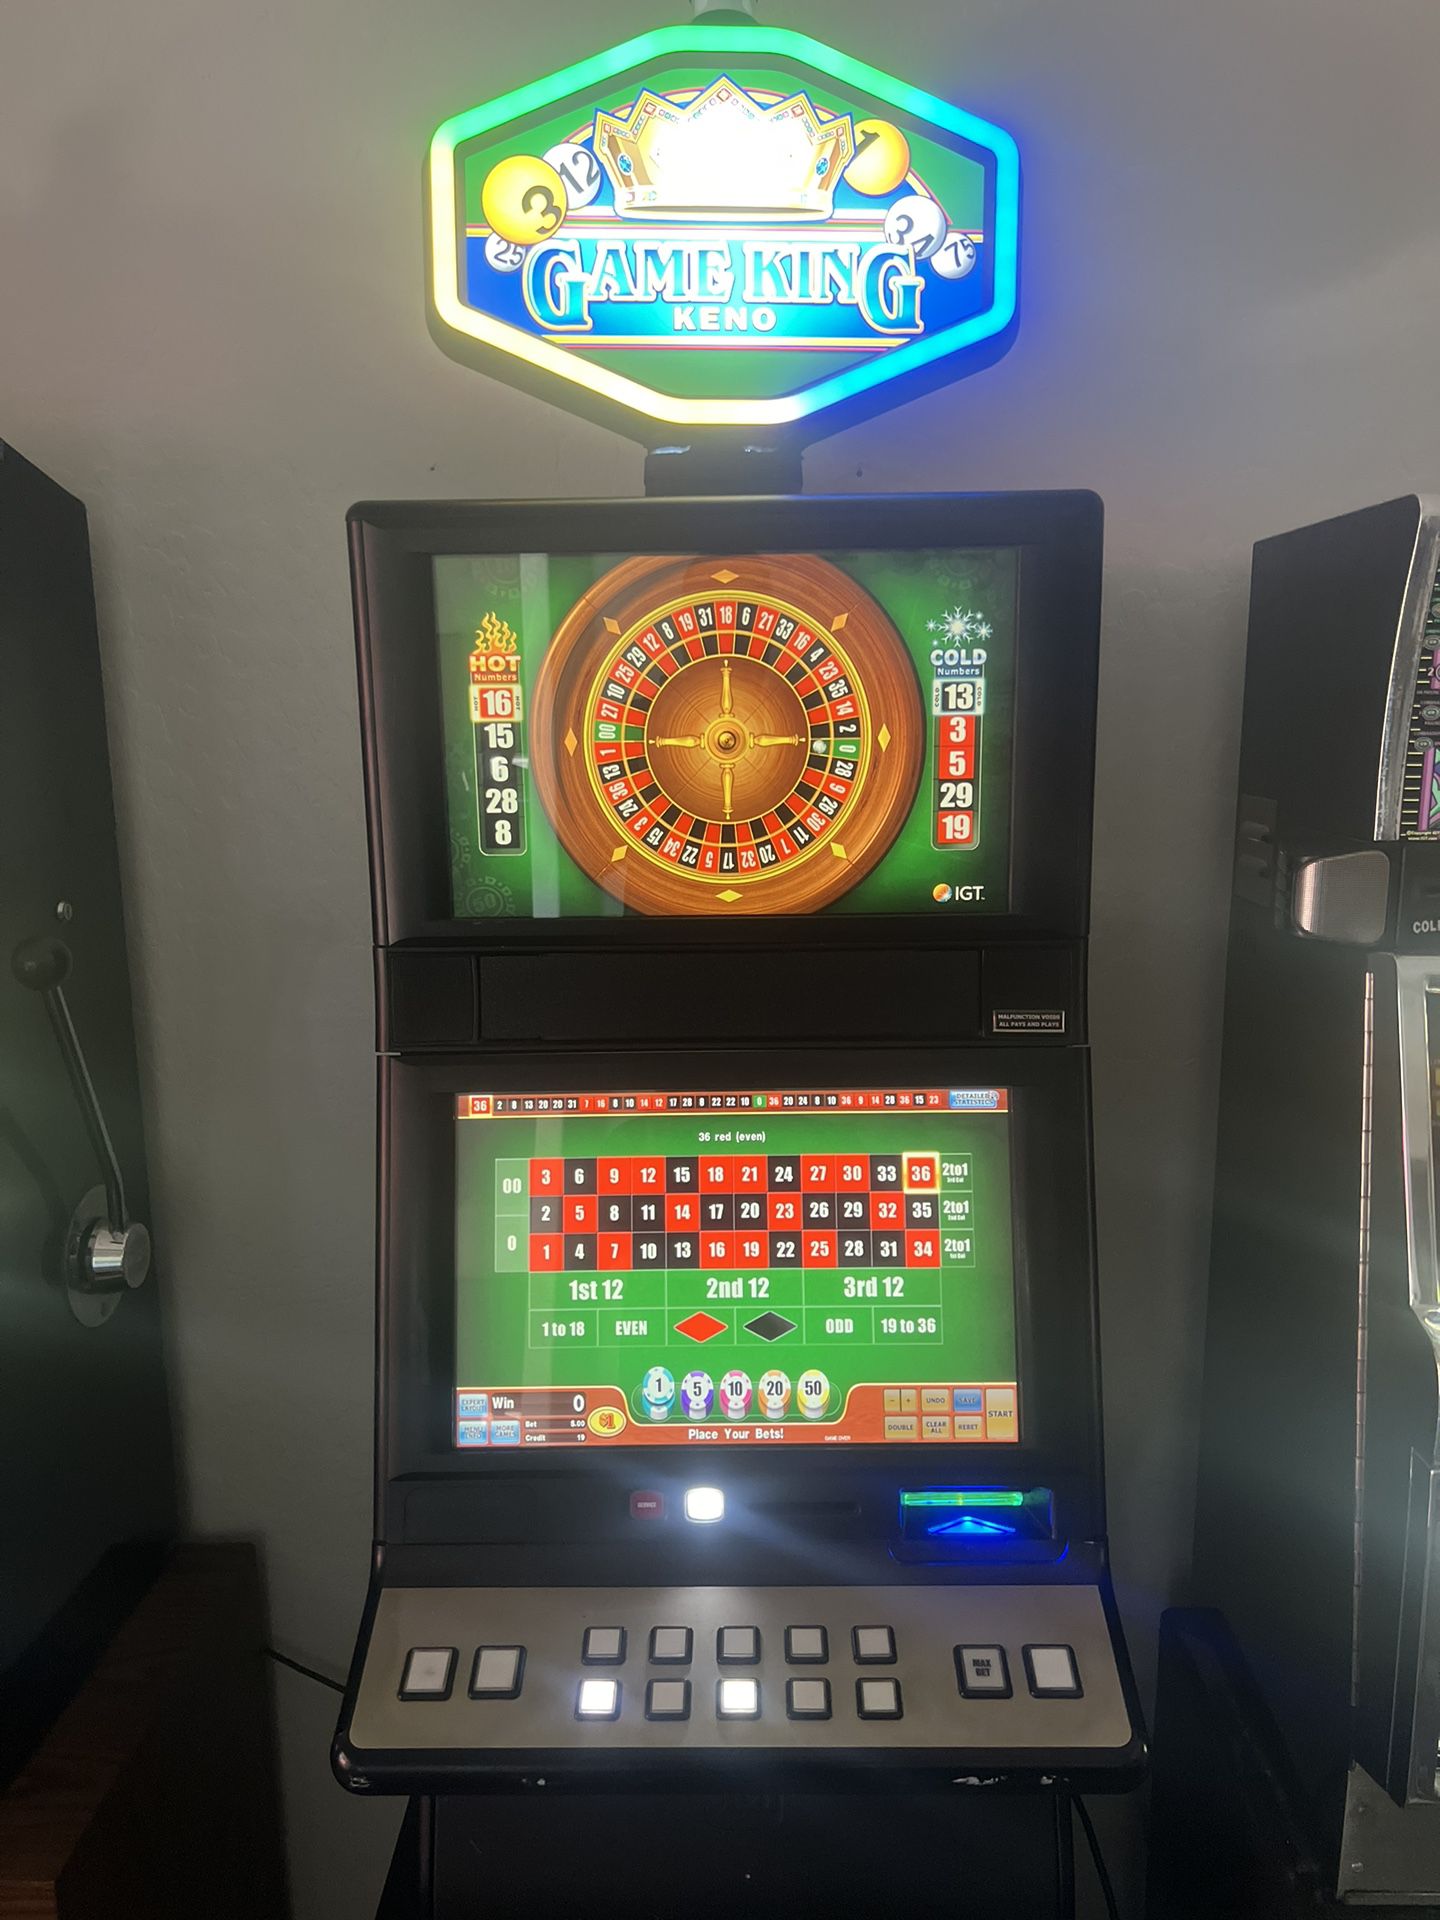 IGT AVP Slot Machine Over 100 Games With Roulette!